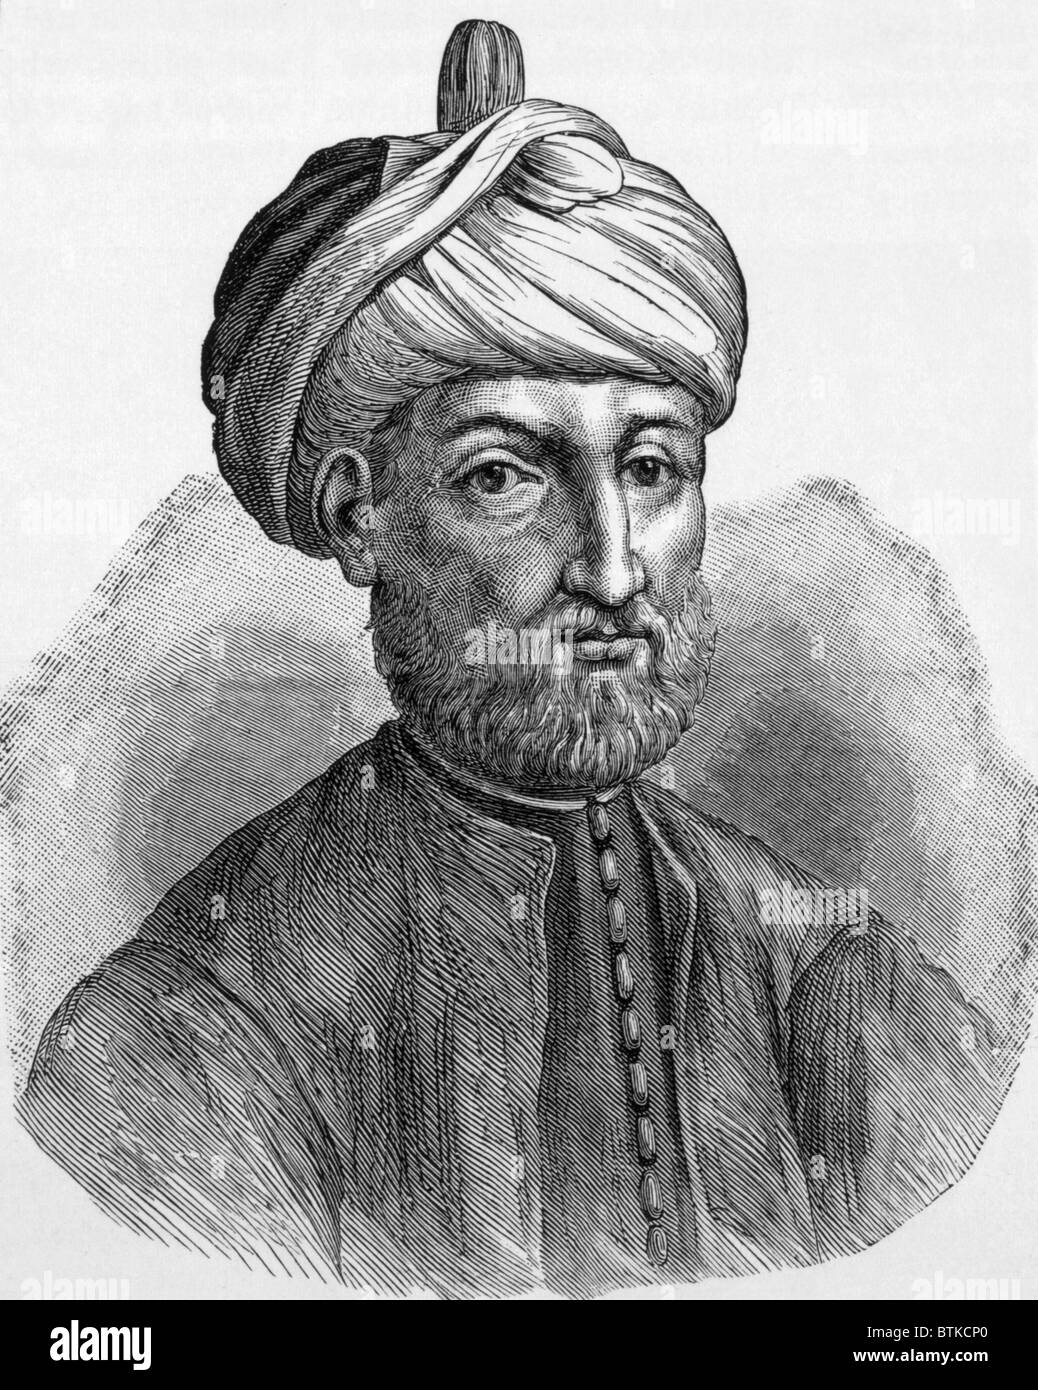 Muhammad, the Prophet of Islam (ca. 570-632 A.D.), engraving from 'Life of the Prophet' by Sieur de Reyr, 1812 Stock Photo